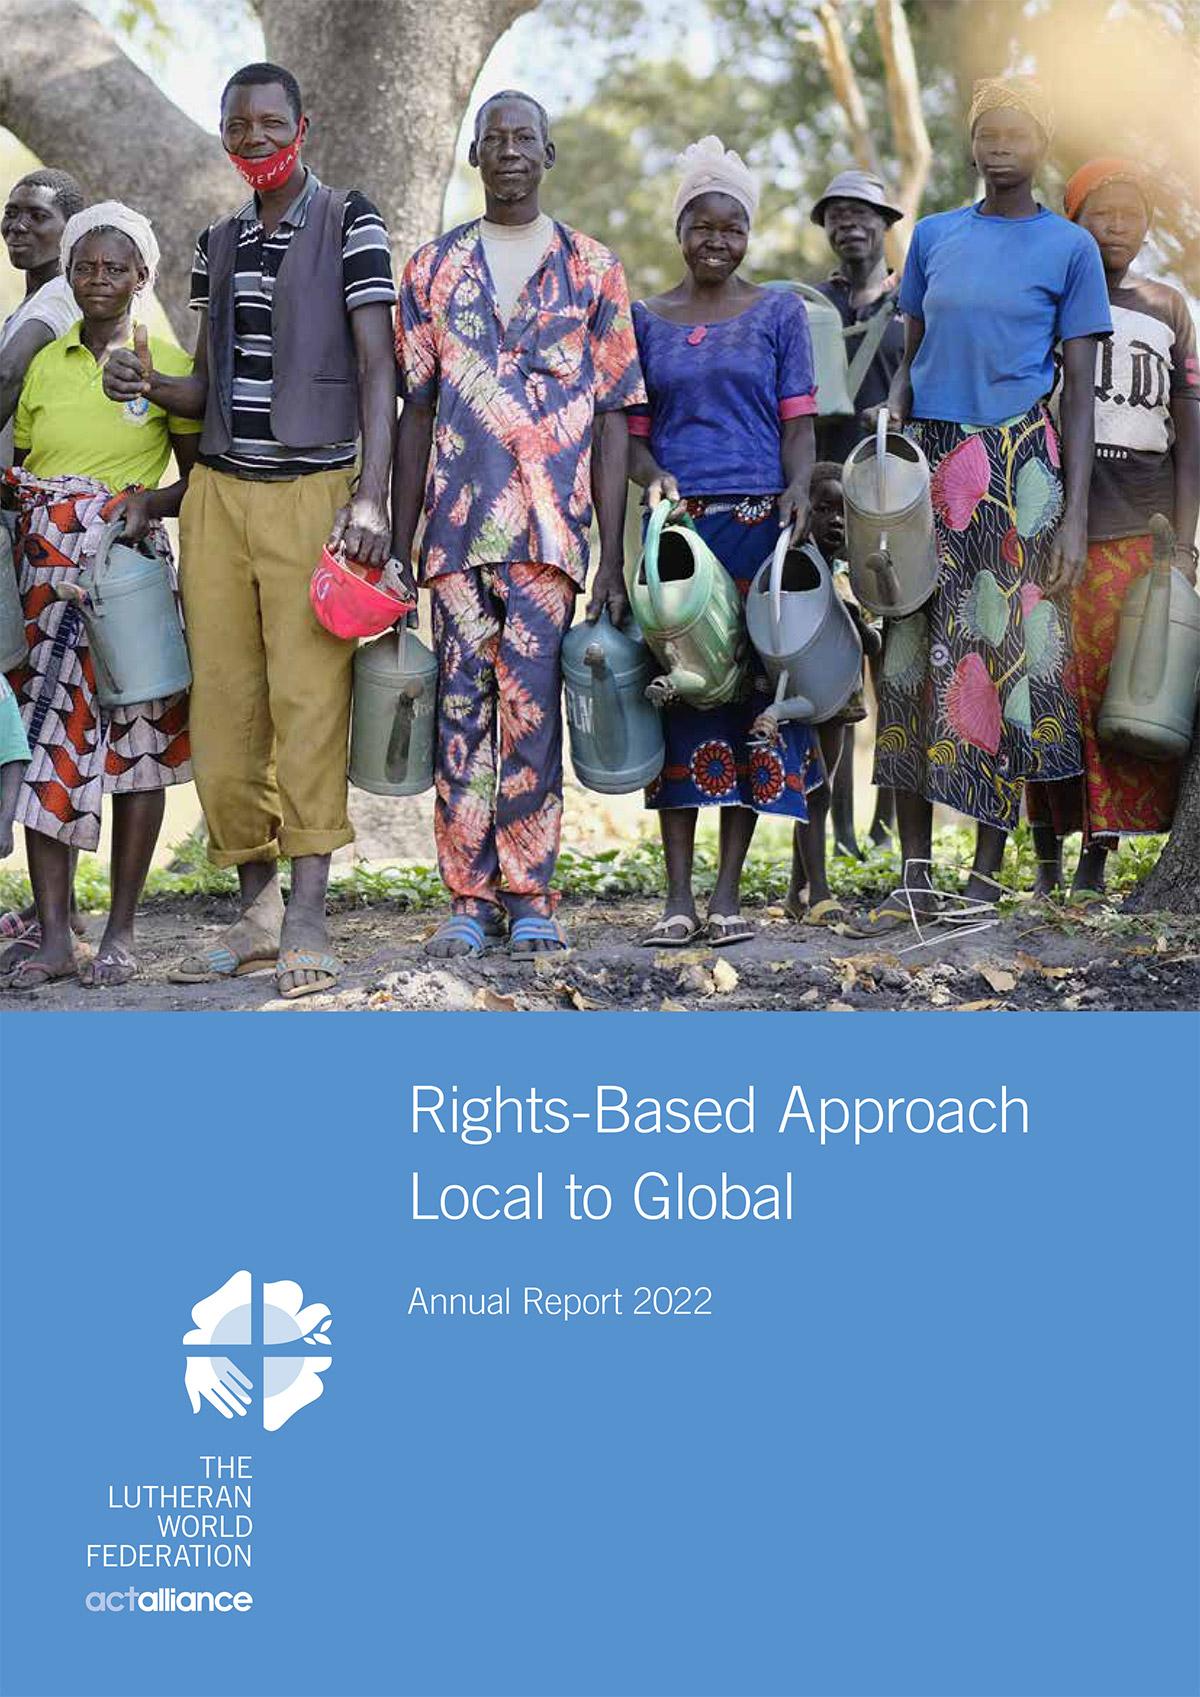 RBA Local to Global Annual Report 2022